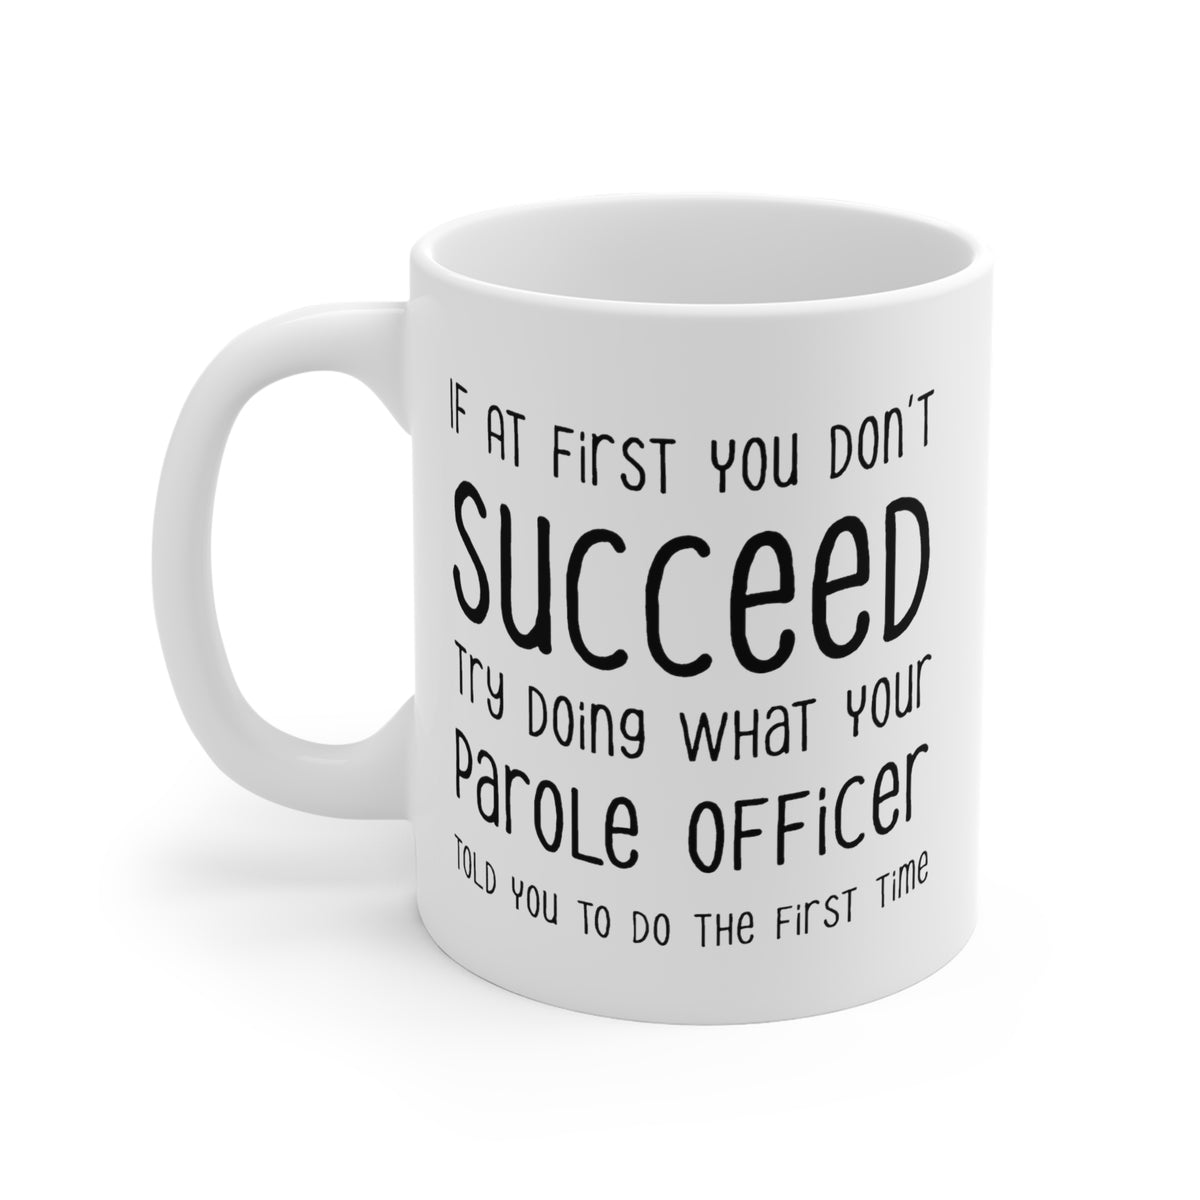 Parole officer Coffee Mug - Doing What Your Parole officer Told You - Funny Sarcasm Gifts for Men and Women